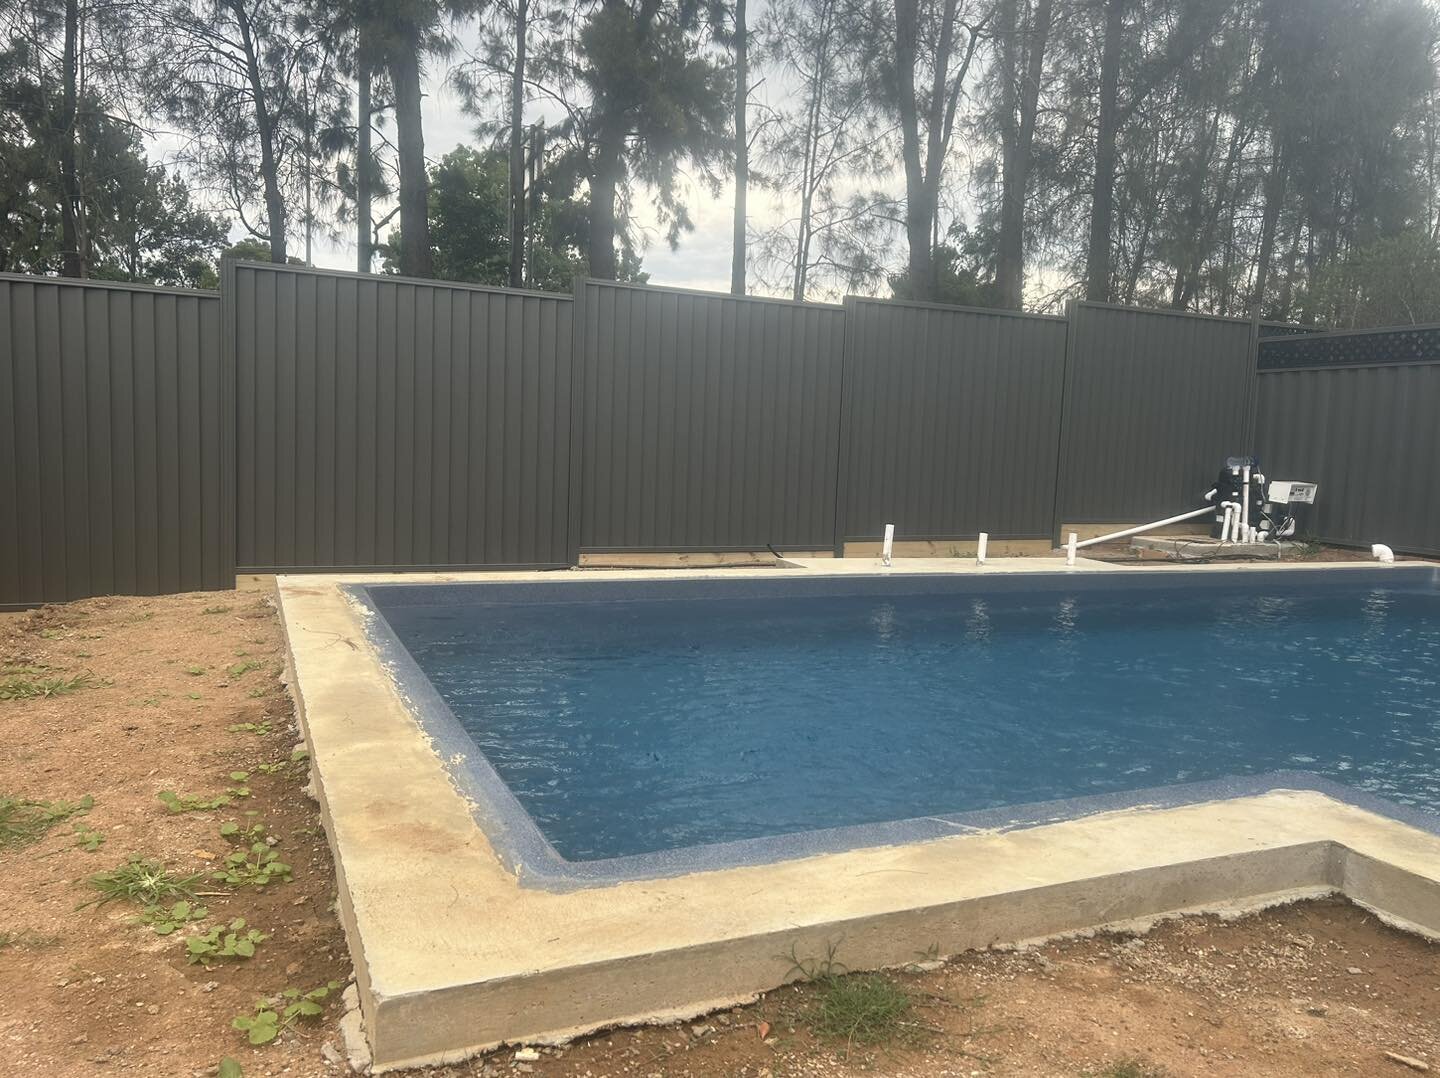 Removed and replaced an existing boundary fence to both update and renew and also achieve pool compliance for a new swimming pool for a lovely local family. We used 2100mm high fencing with a combination of singular and double sleepers to ensure no g